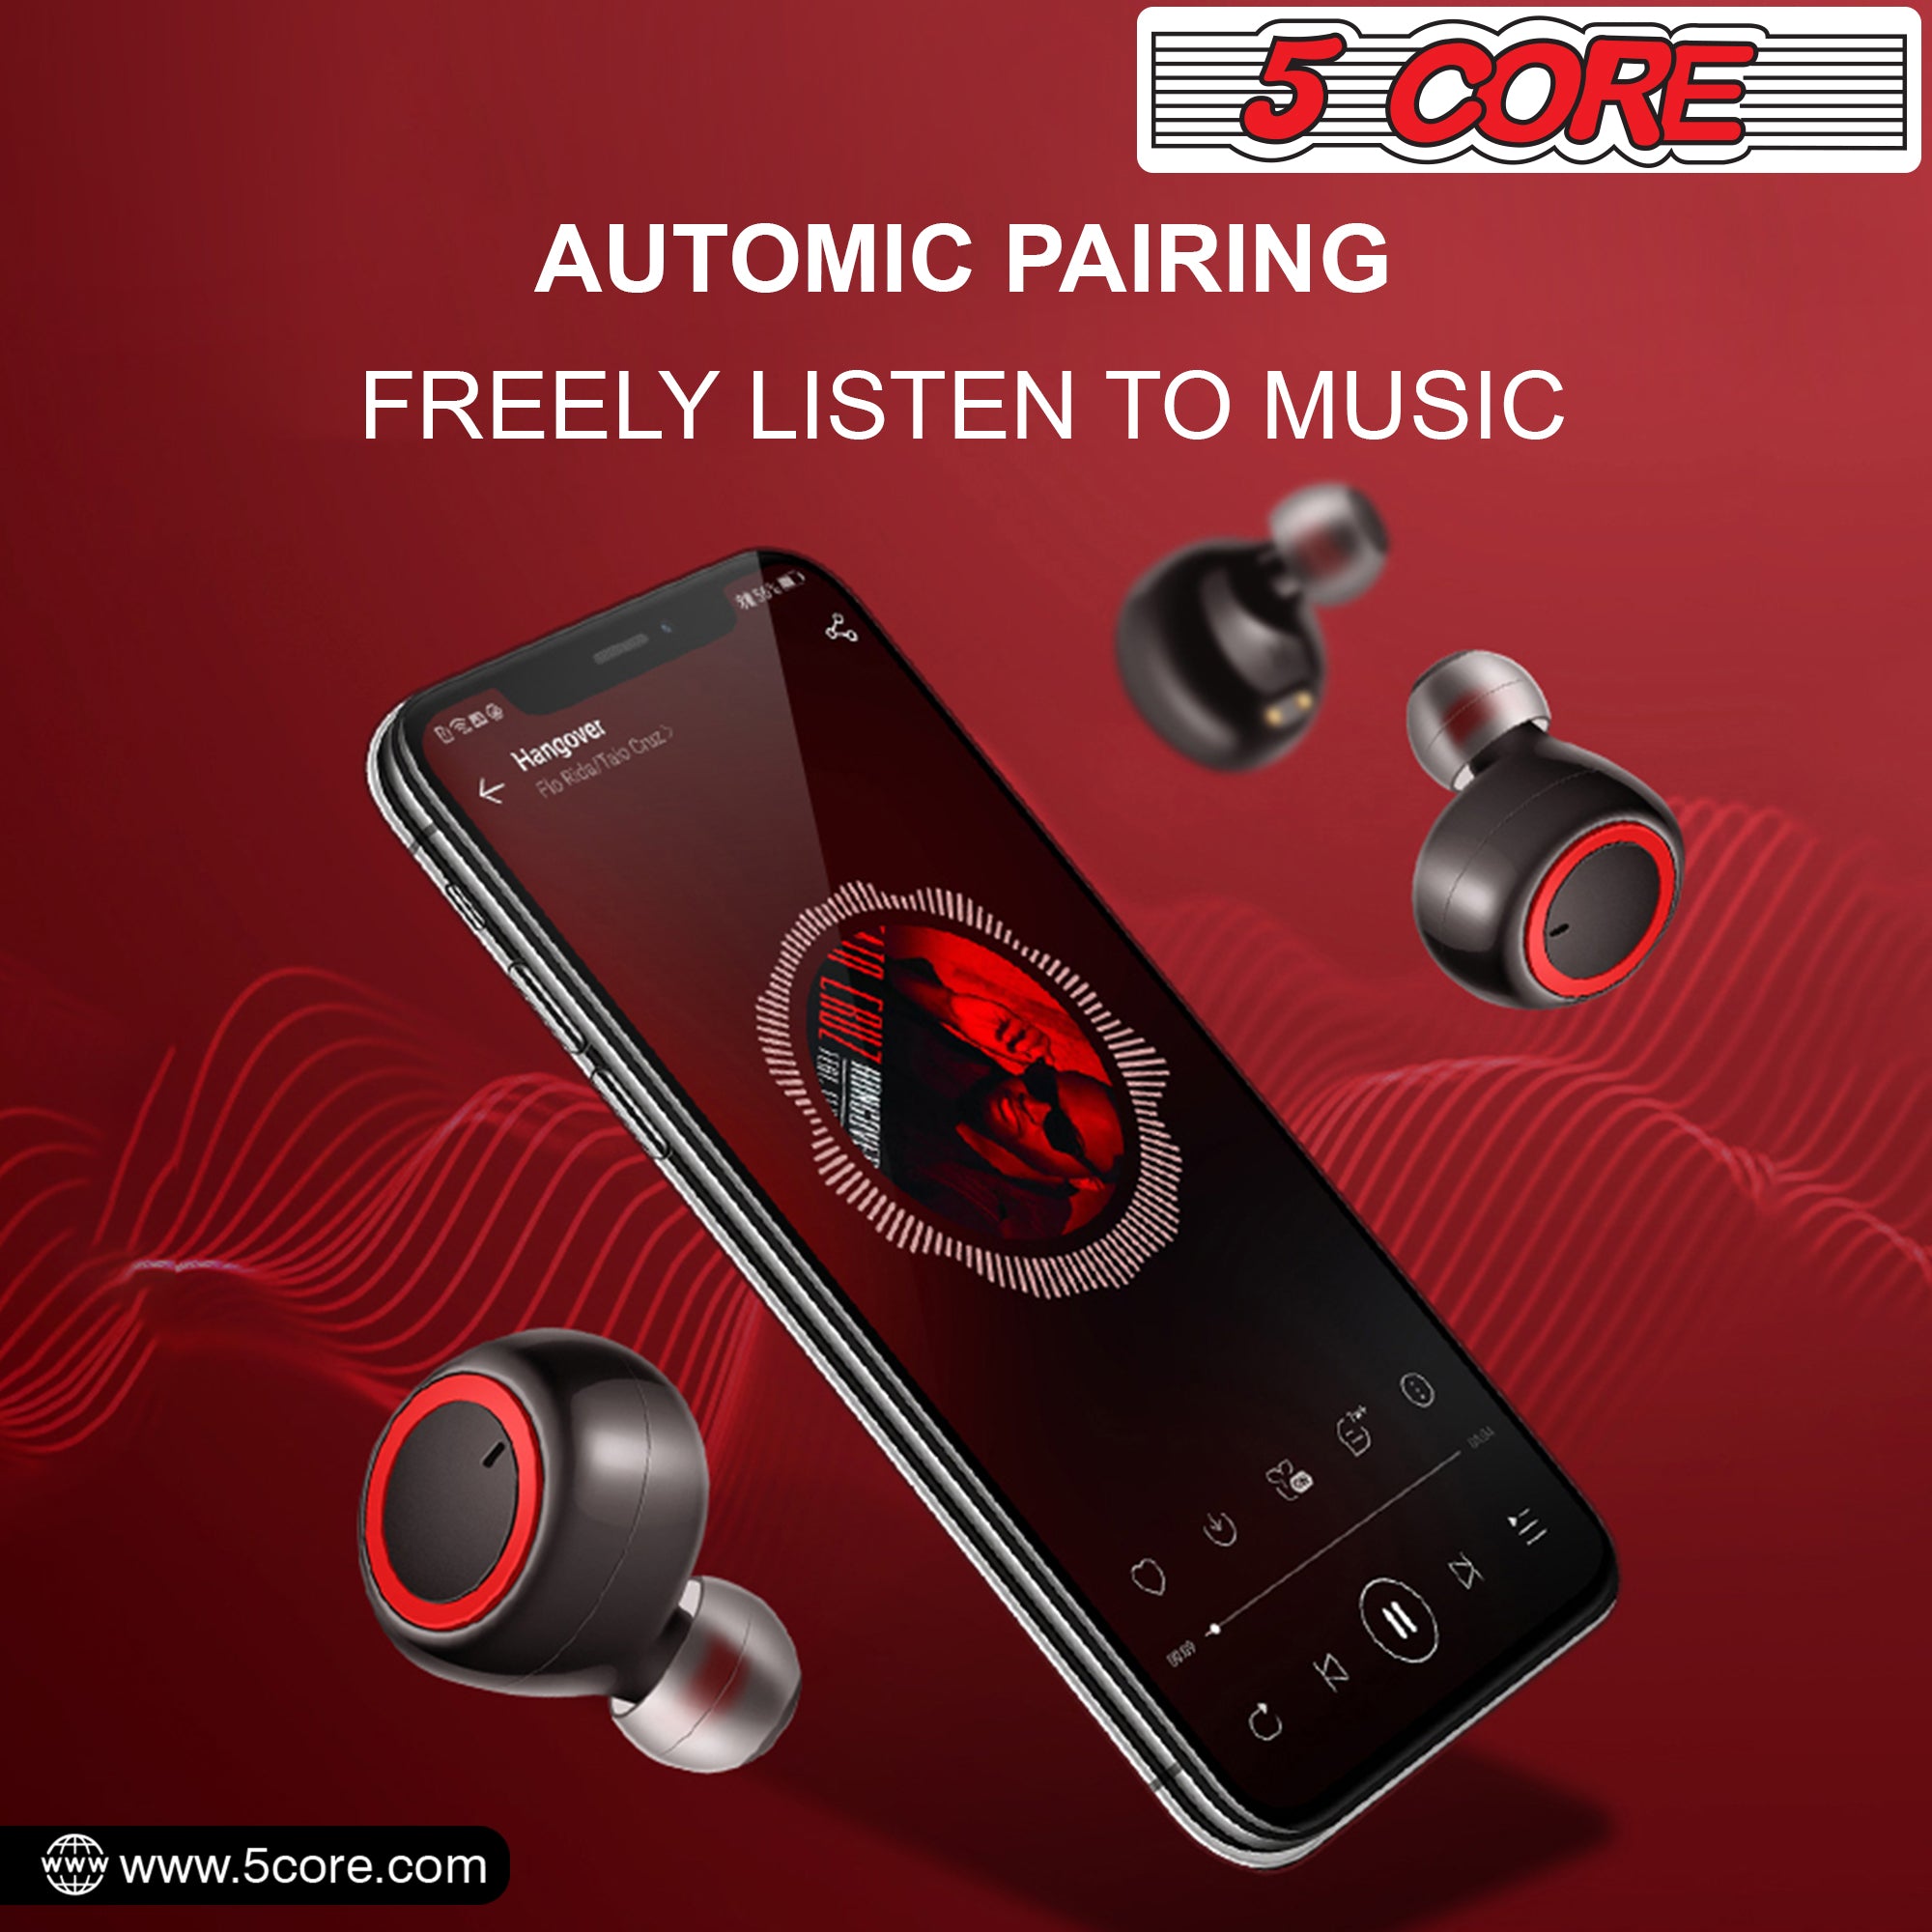 automic pairing freely listen to music